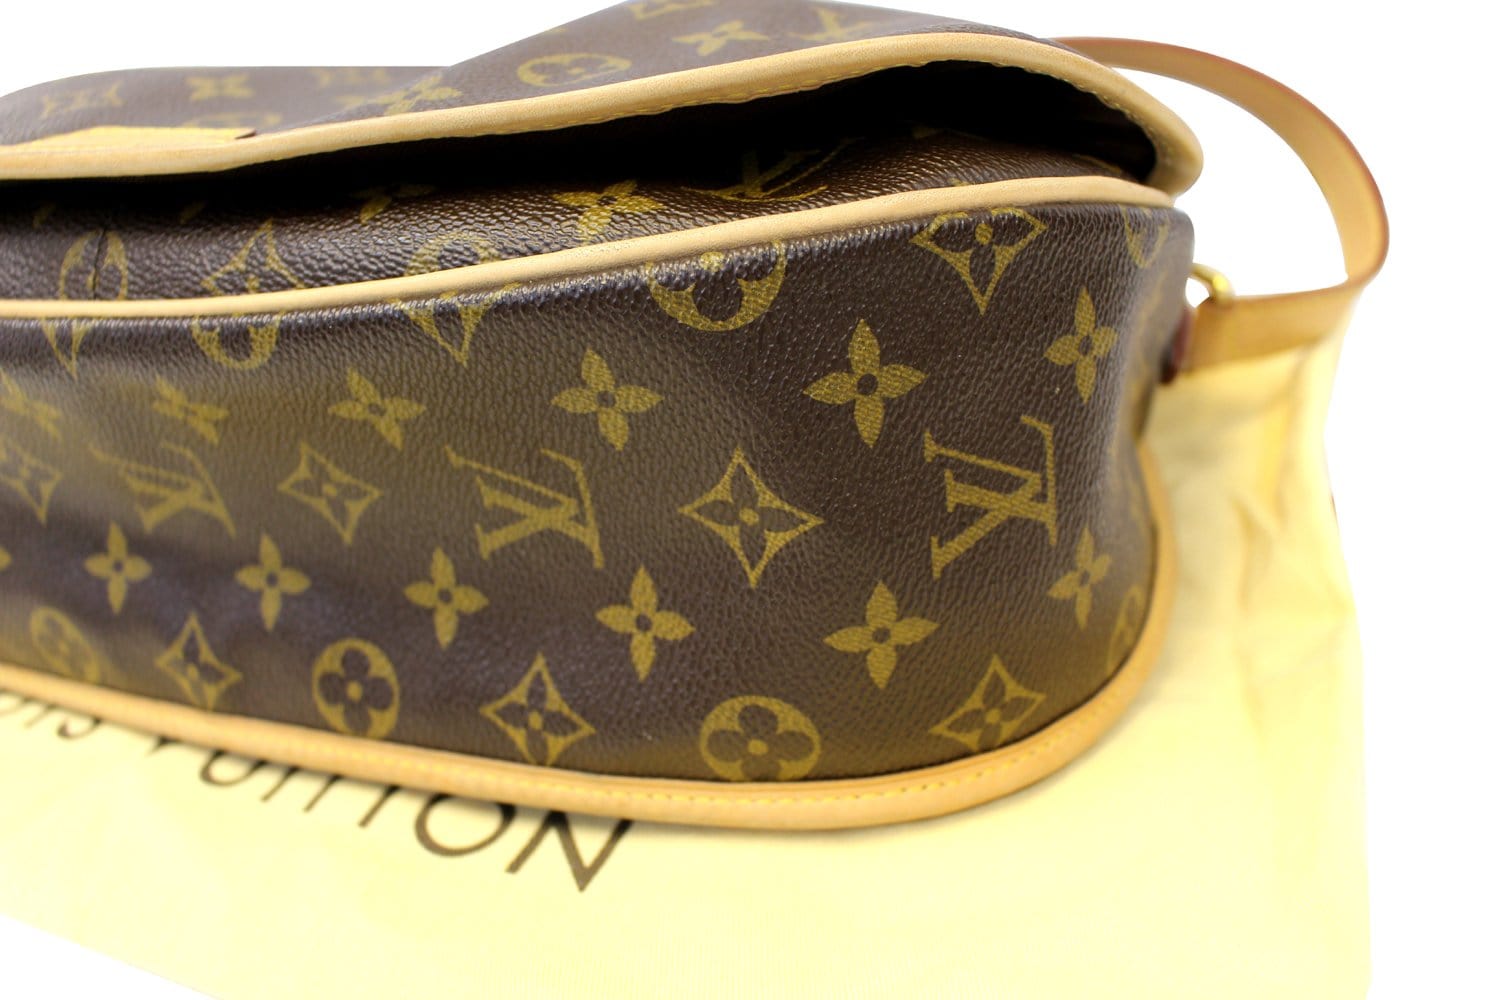 LOUIS VUITTON CROSSBODY BAG EXTRA LARGE PERFECT FOR LABTOP